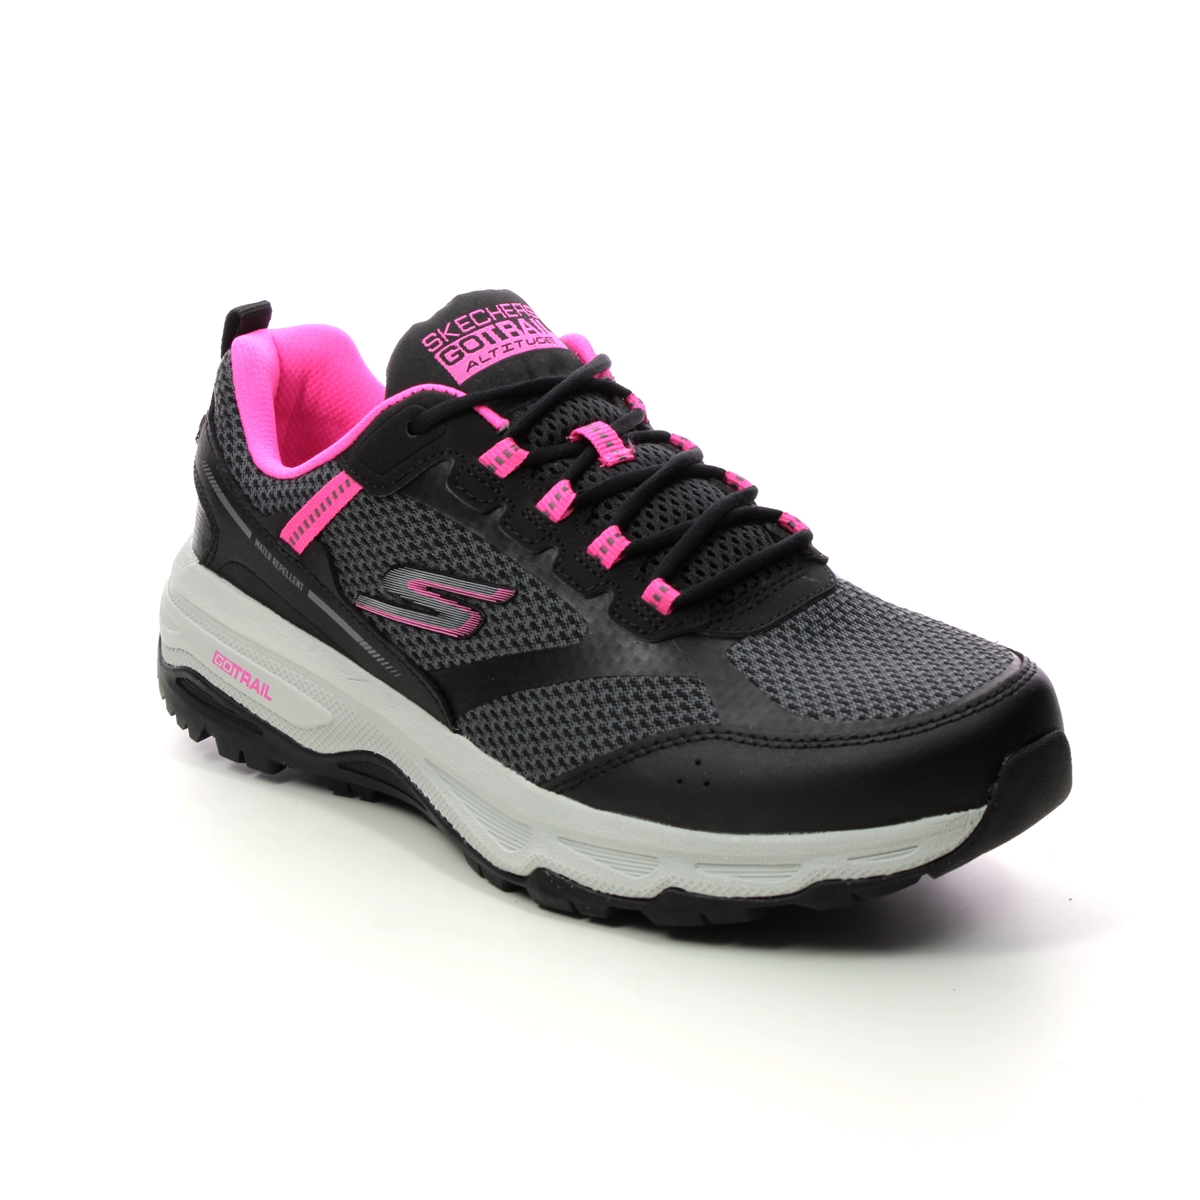 Skechers Go Run Trail Black Pink Womens Trainers 128200 In Size 8 In Plain Black Pink